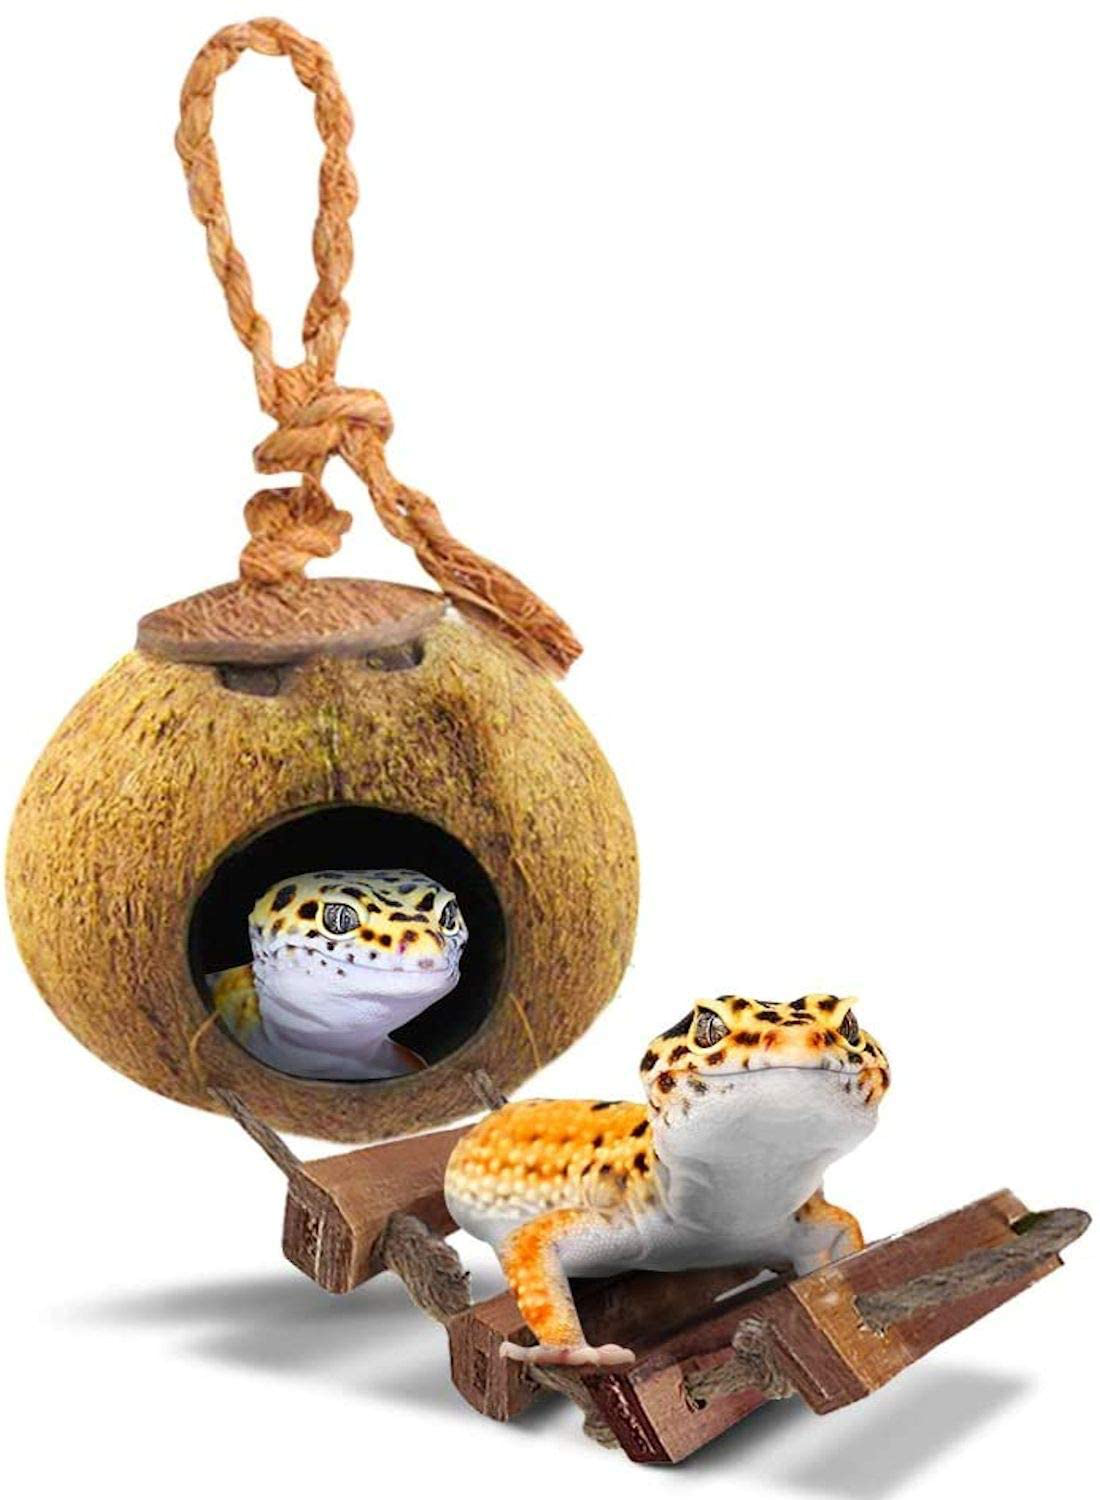 Sungrow Leopard Gecko Coconut Husk Hut with Ladder, 5” Diameter, 2.5” Shell Opening, Cave Habitat with Hanging Loop, 1 Pc per Pack